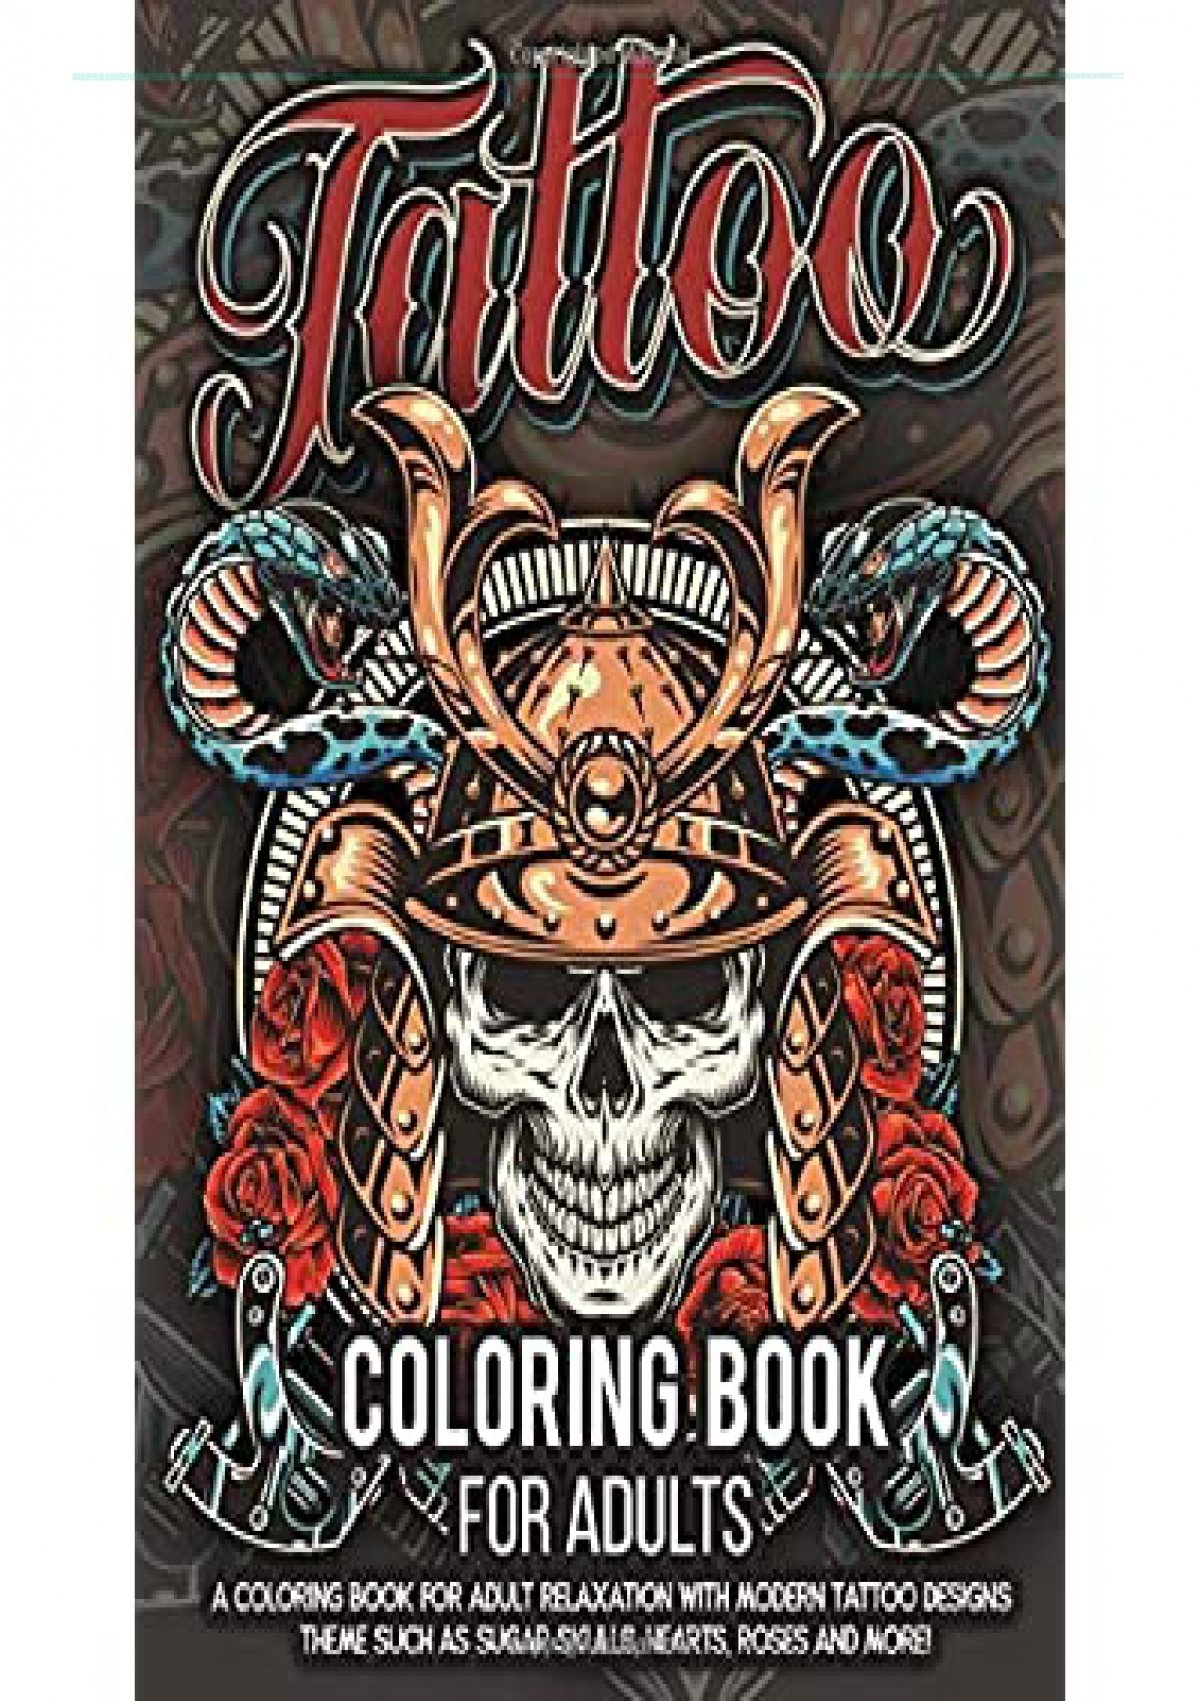 Download Download Tattoo Coloring Book For Adults Over 300 Coloring Pages For Adult Relaxation With Beautiful Modern Tattoo Designs Such As Sugar Skulls Hearts Roses And More Android